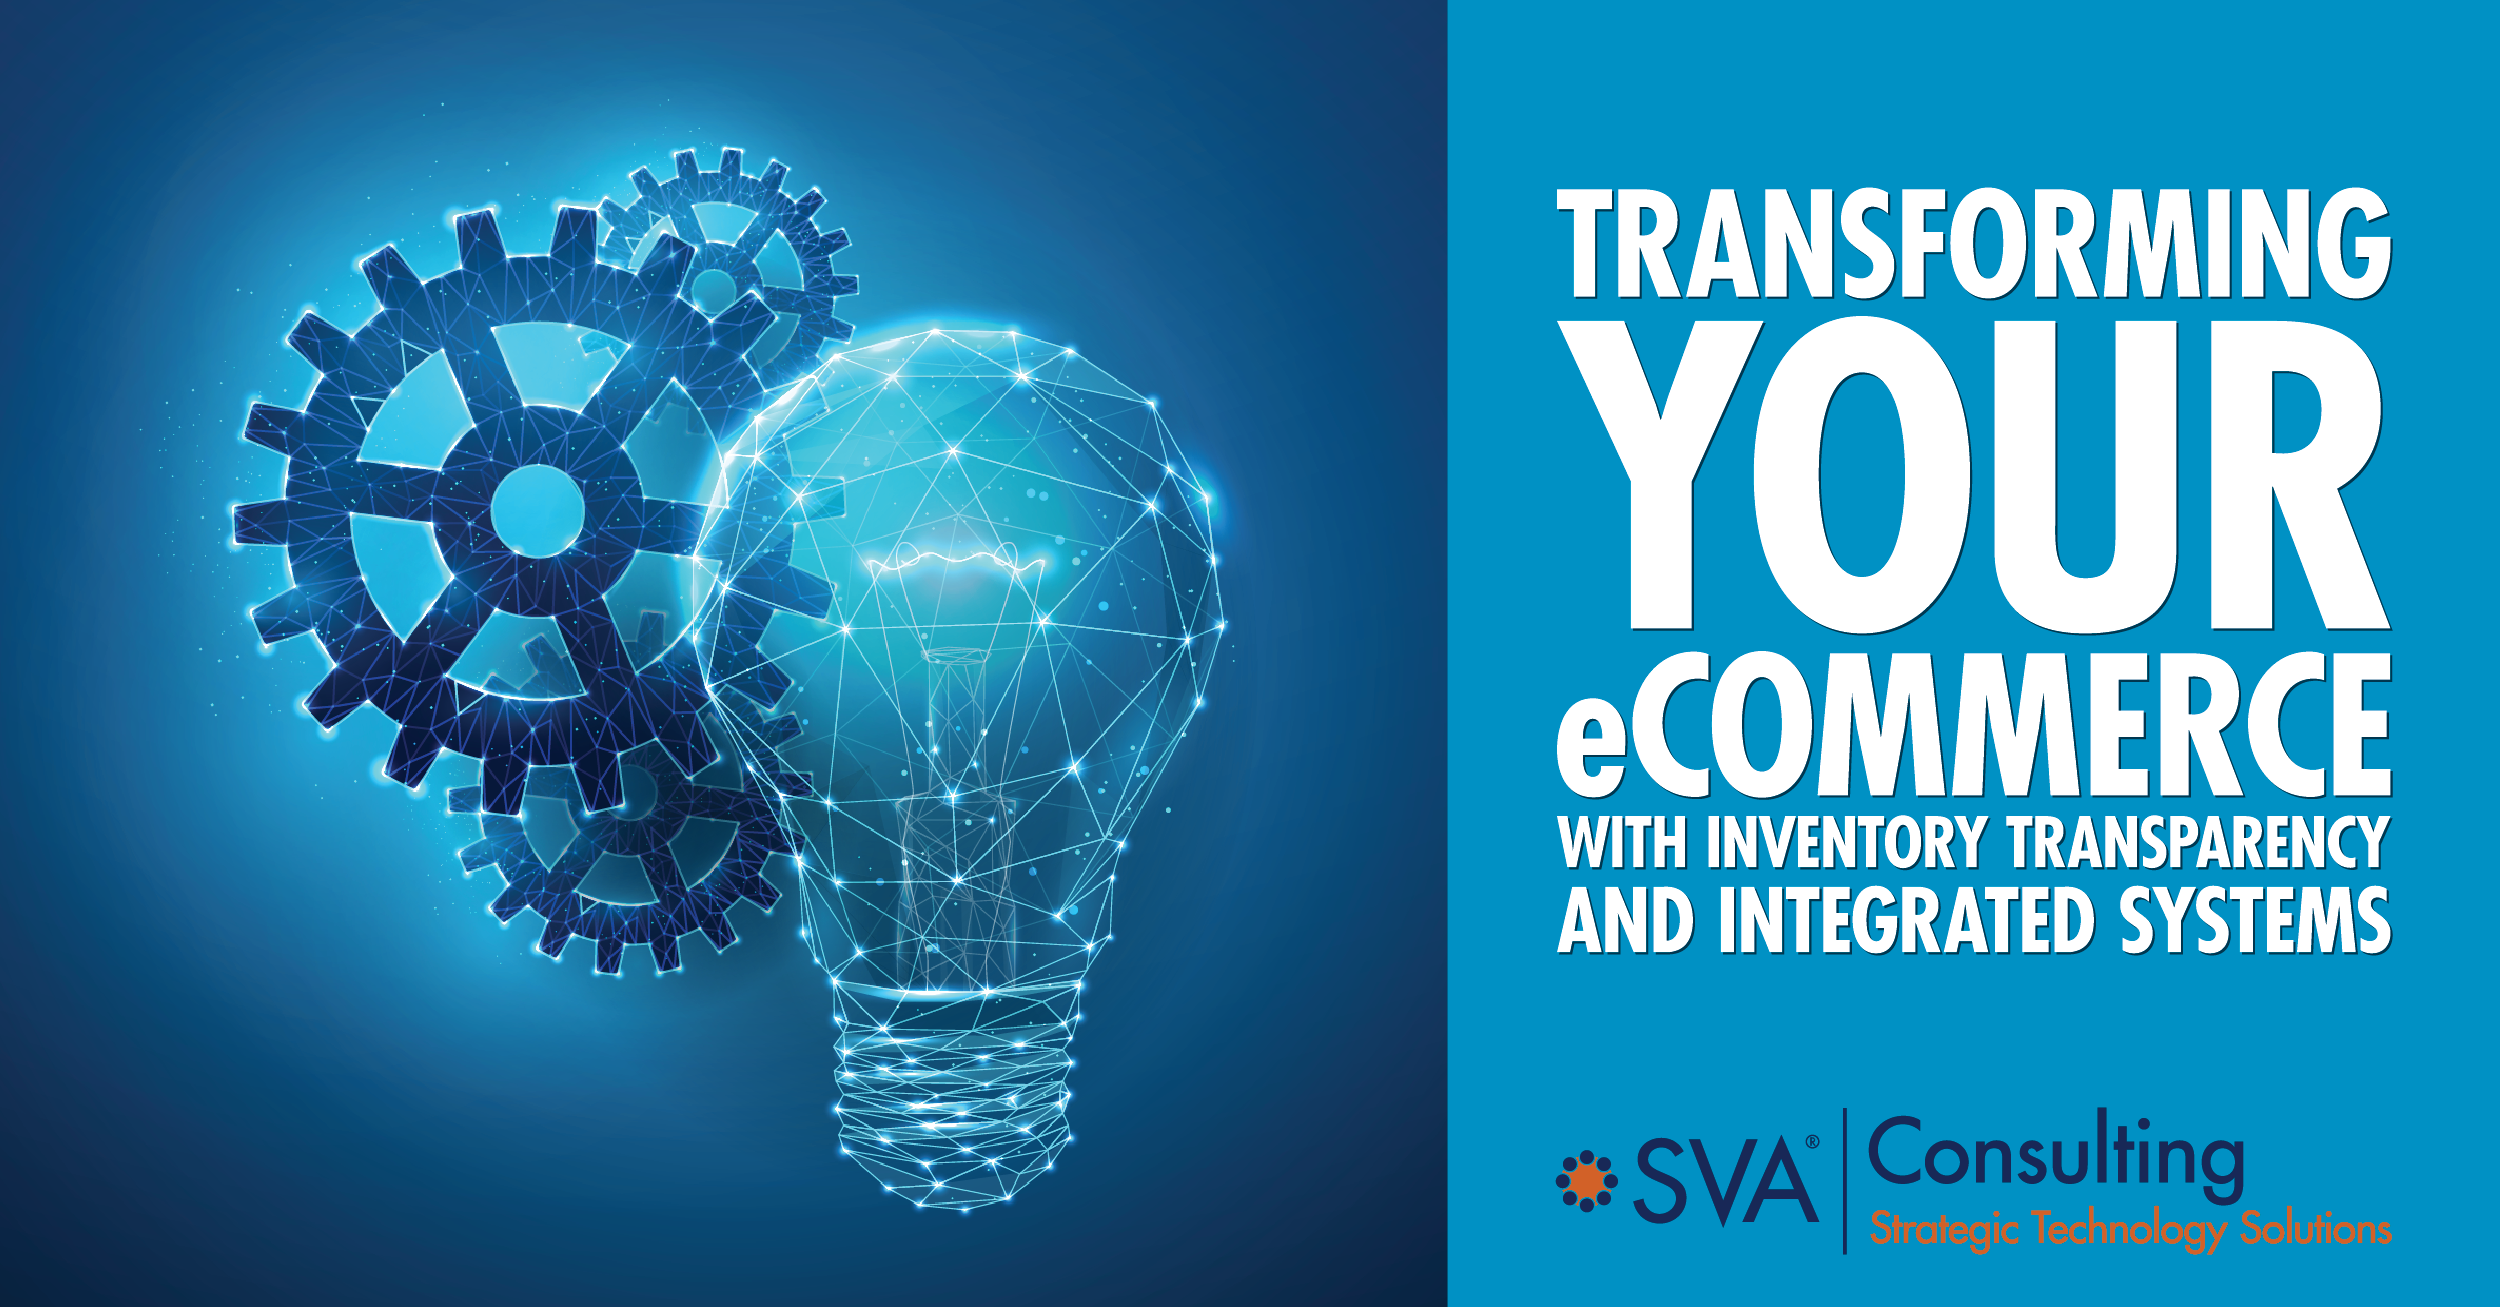 Transforming Your eCommerce with Inventory Transparency and Integrated Systems